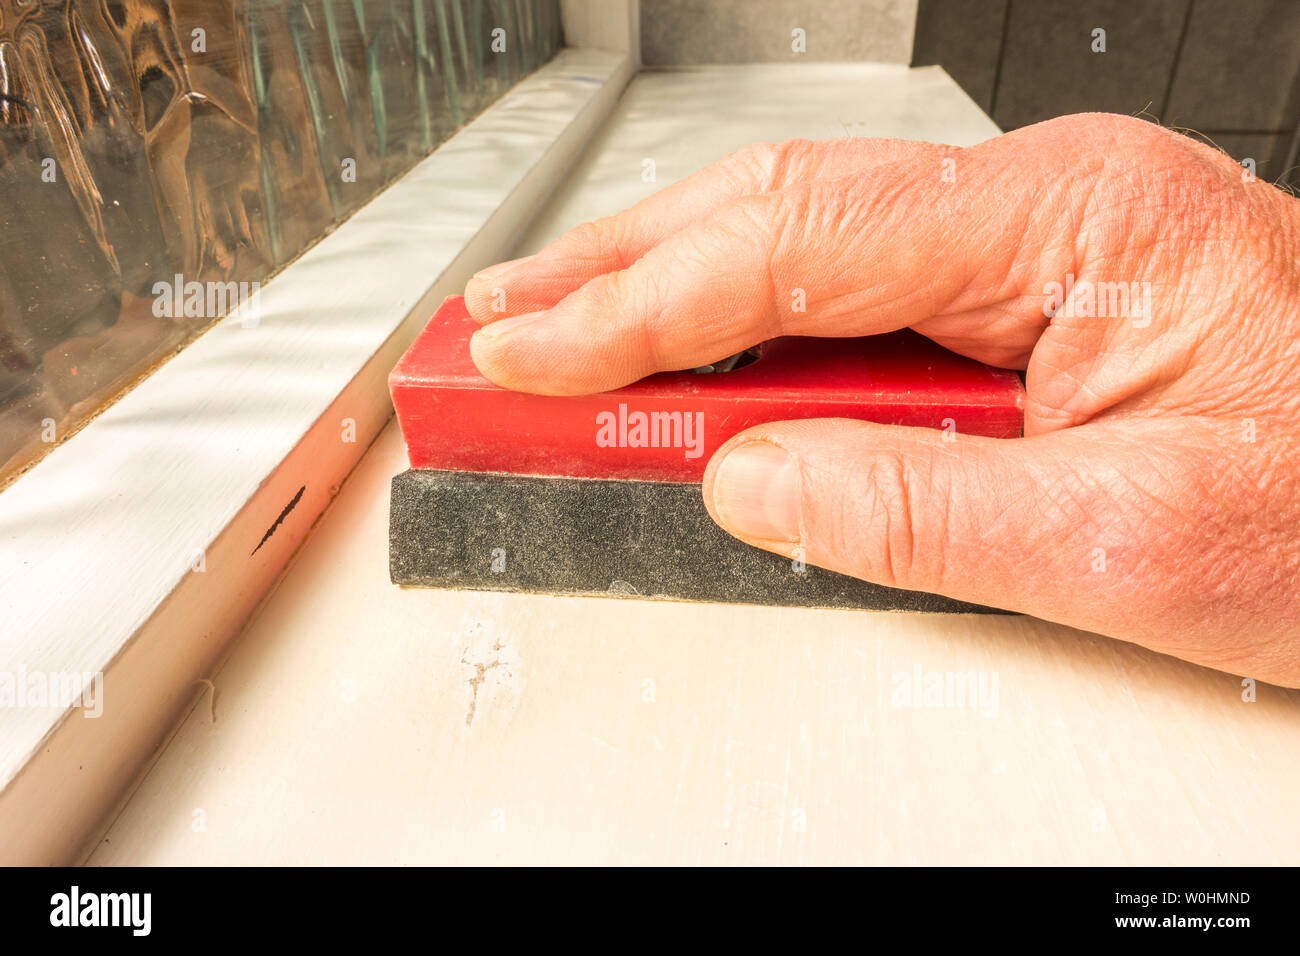 Man’s hand using a sanding block with abrasive sandpaper, to rub down a painted bathroom shelf prior to repainting. Stock Photo